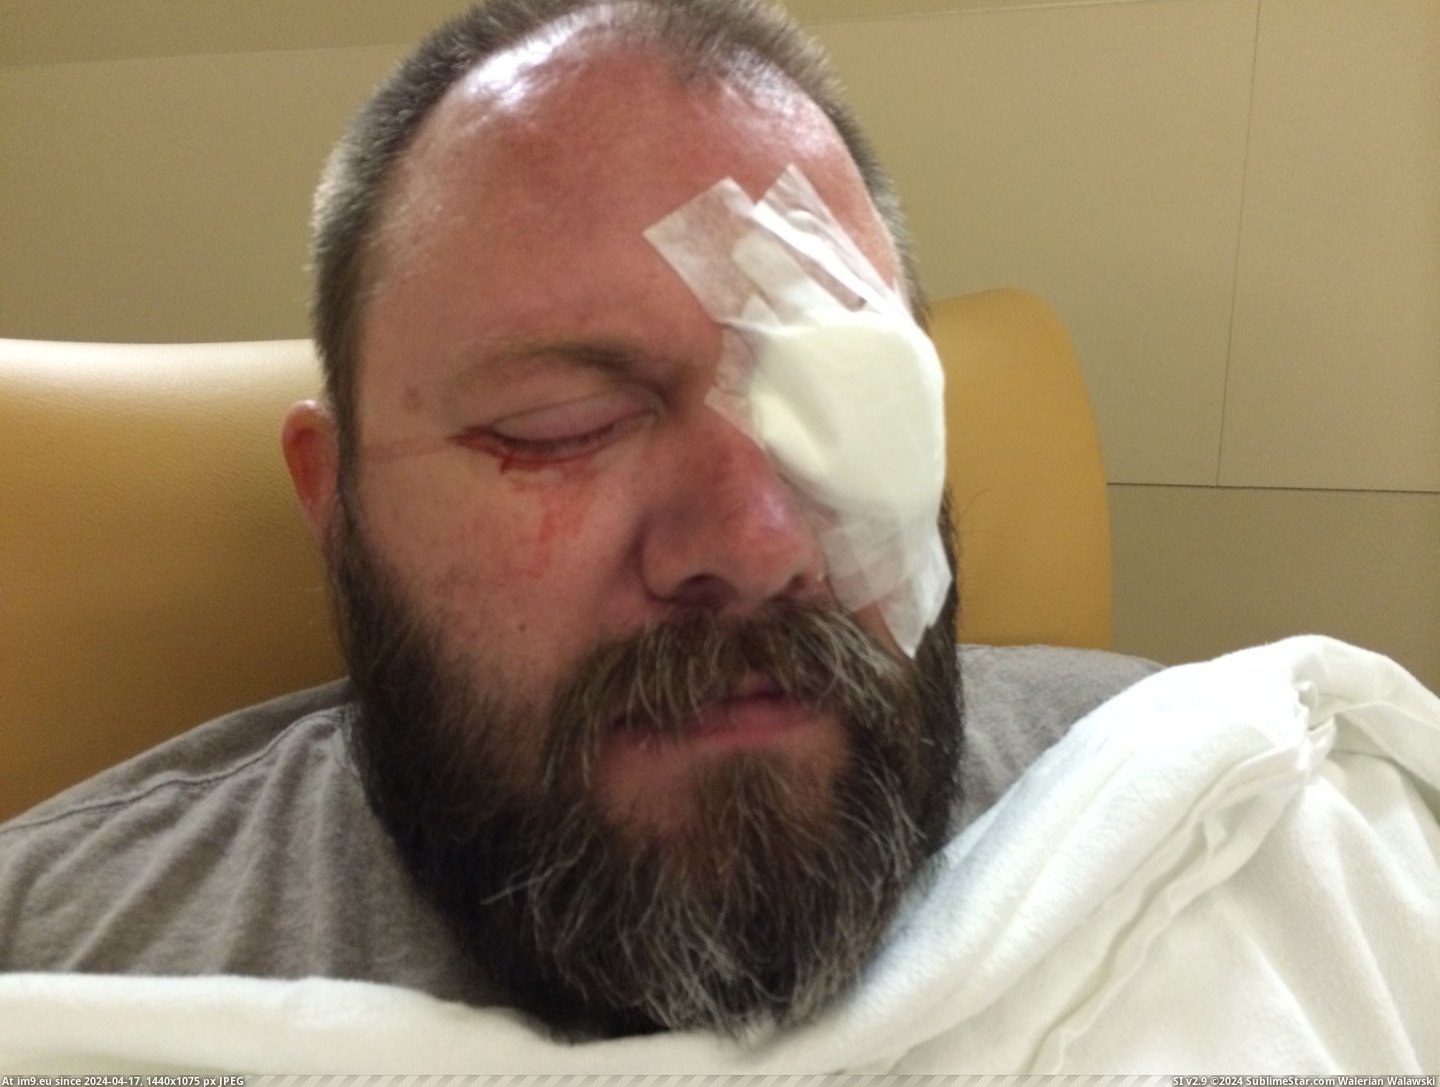 #Wtf #Surgery #Eye [Wtf] Had Eye Surgery Yesterday. 7 Pic. (Image of album My r/WTF favs))